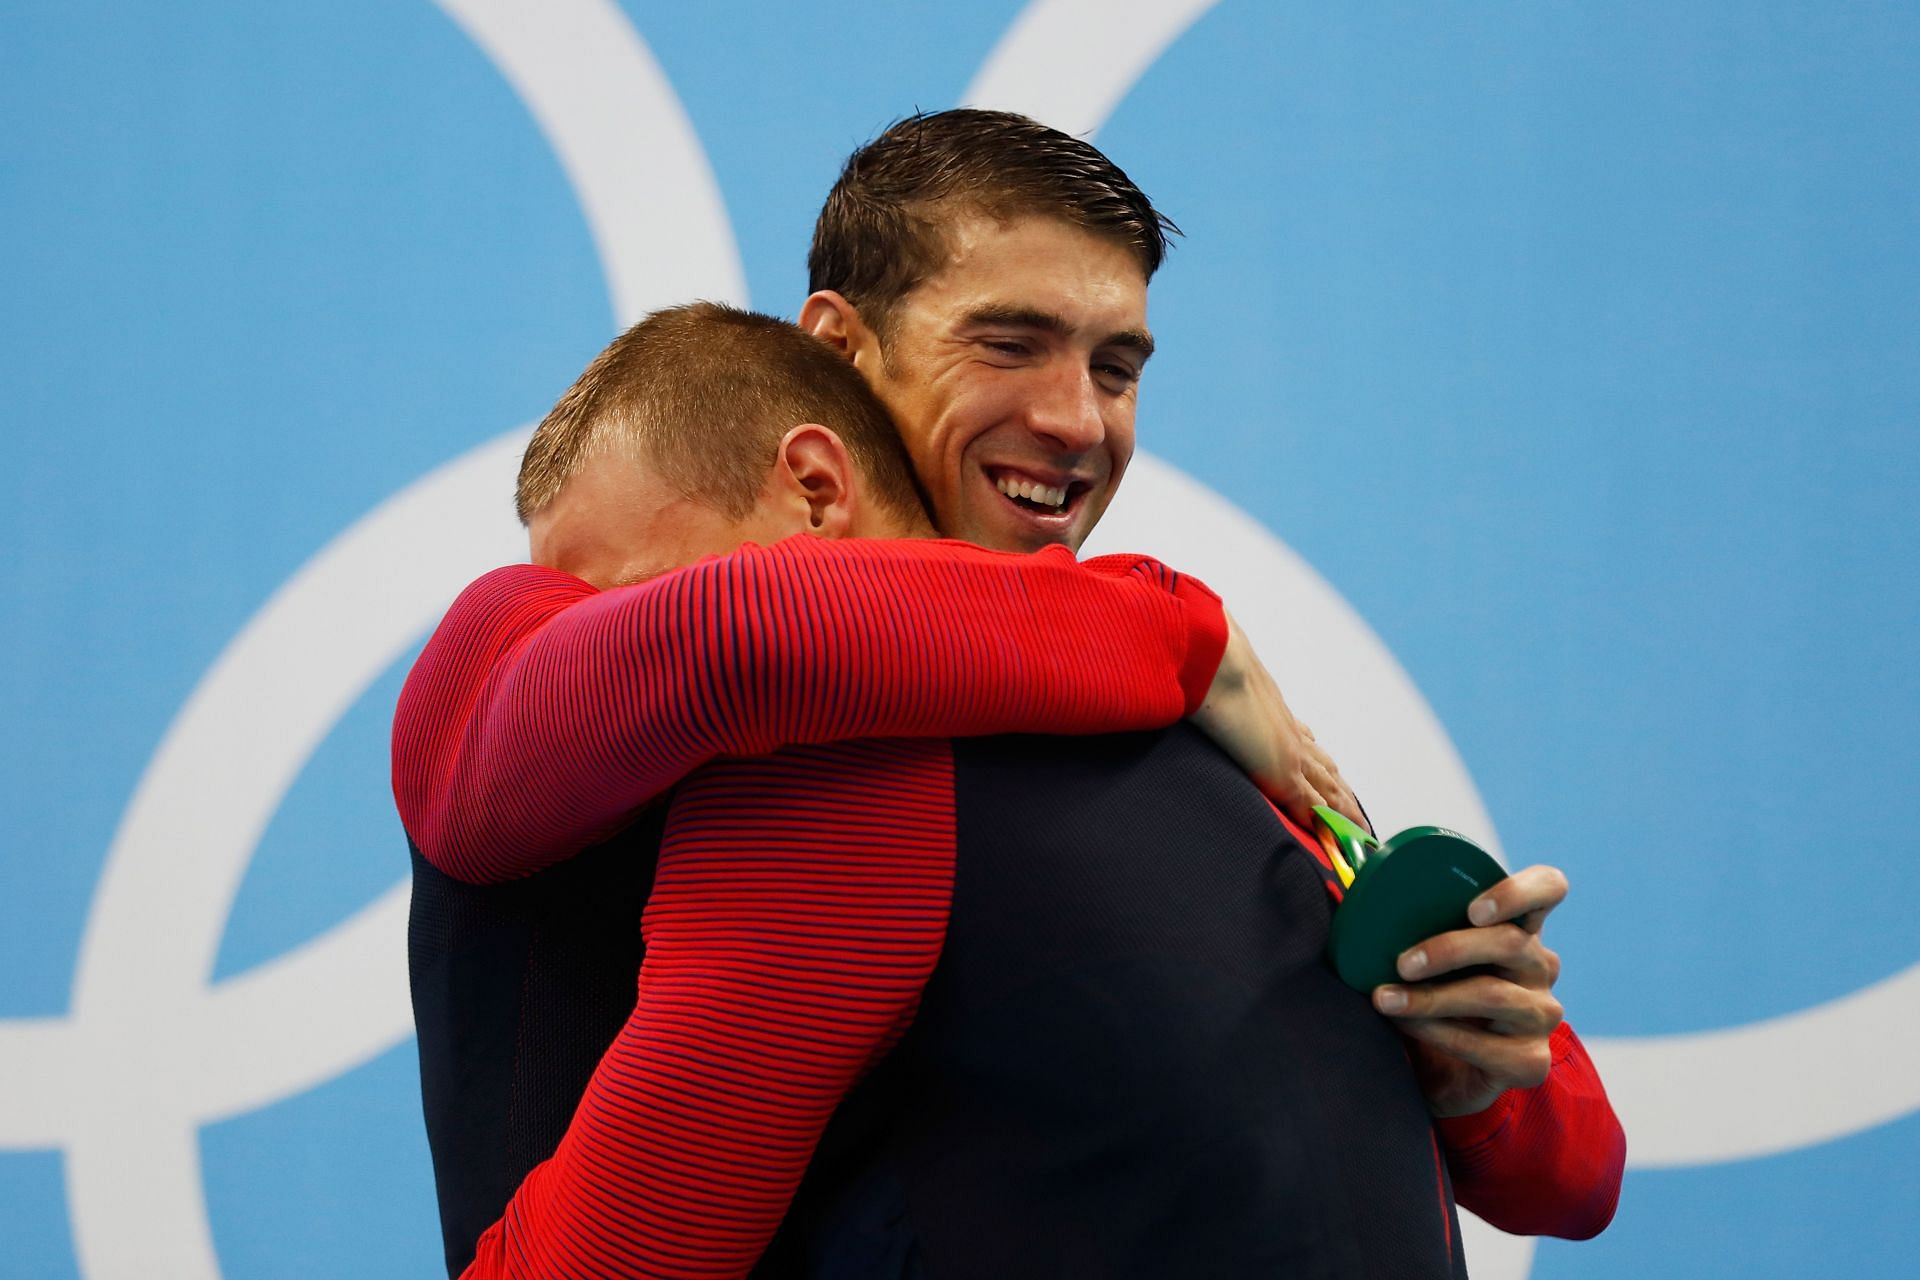 Michael Phelps and Caeleb Dressel during the 2016 Rio Olympics